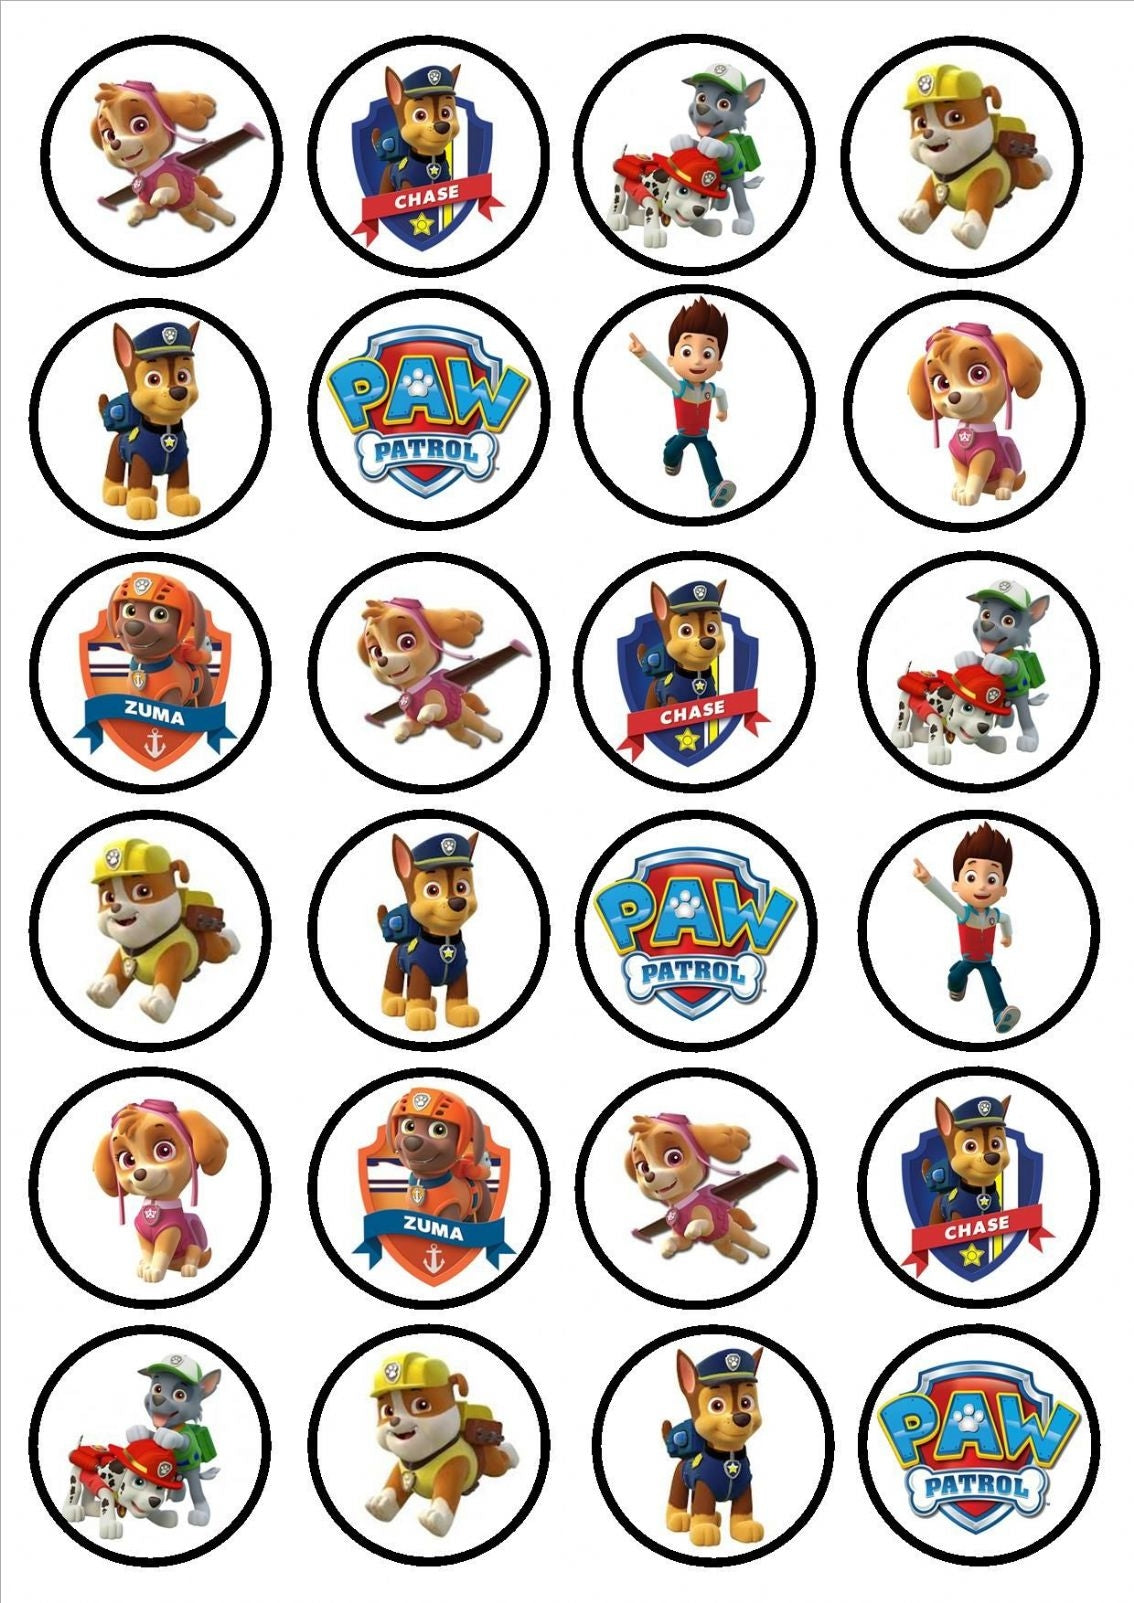 Paw Patrol Logo Chase Everest Tracker Skye Zuma Marshall Rocky Ryder Rubble Edible Cupcake Topper Images ABPID03724